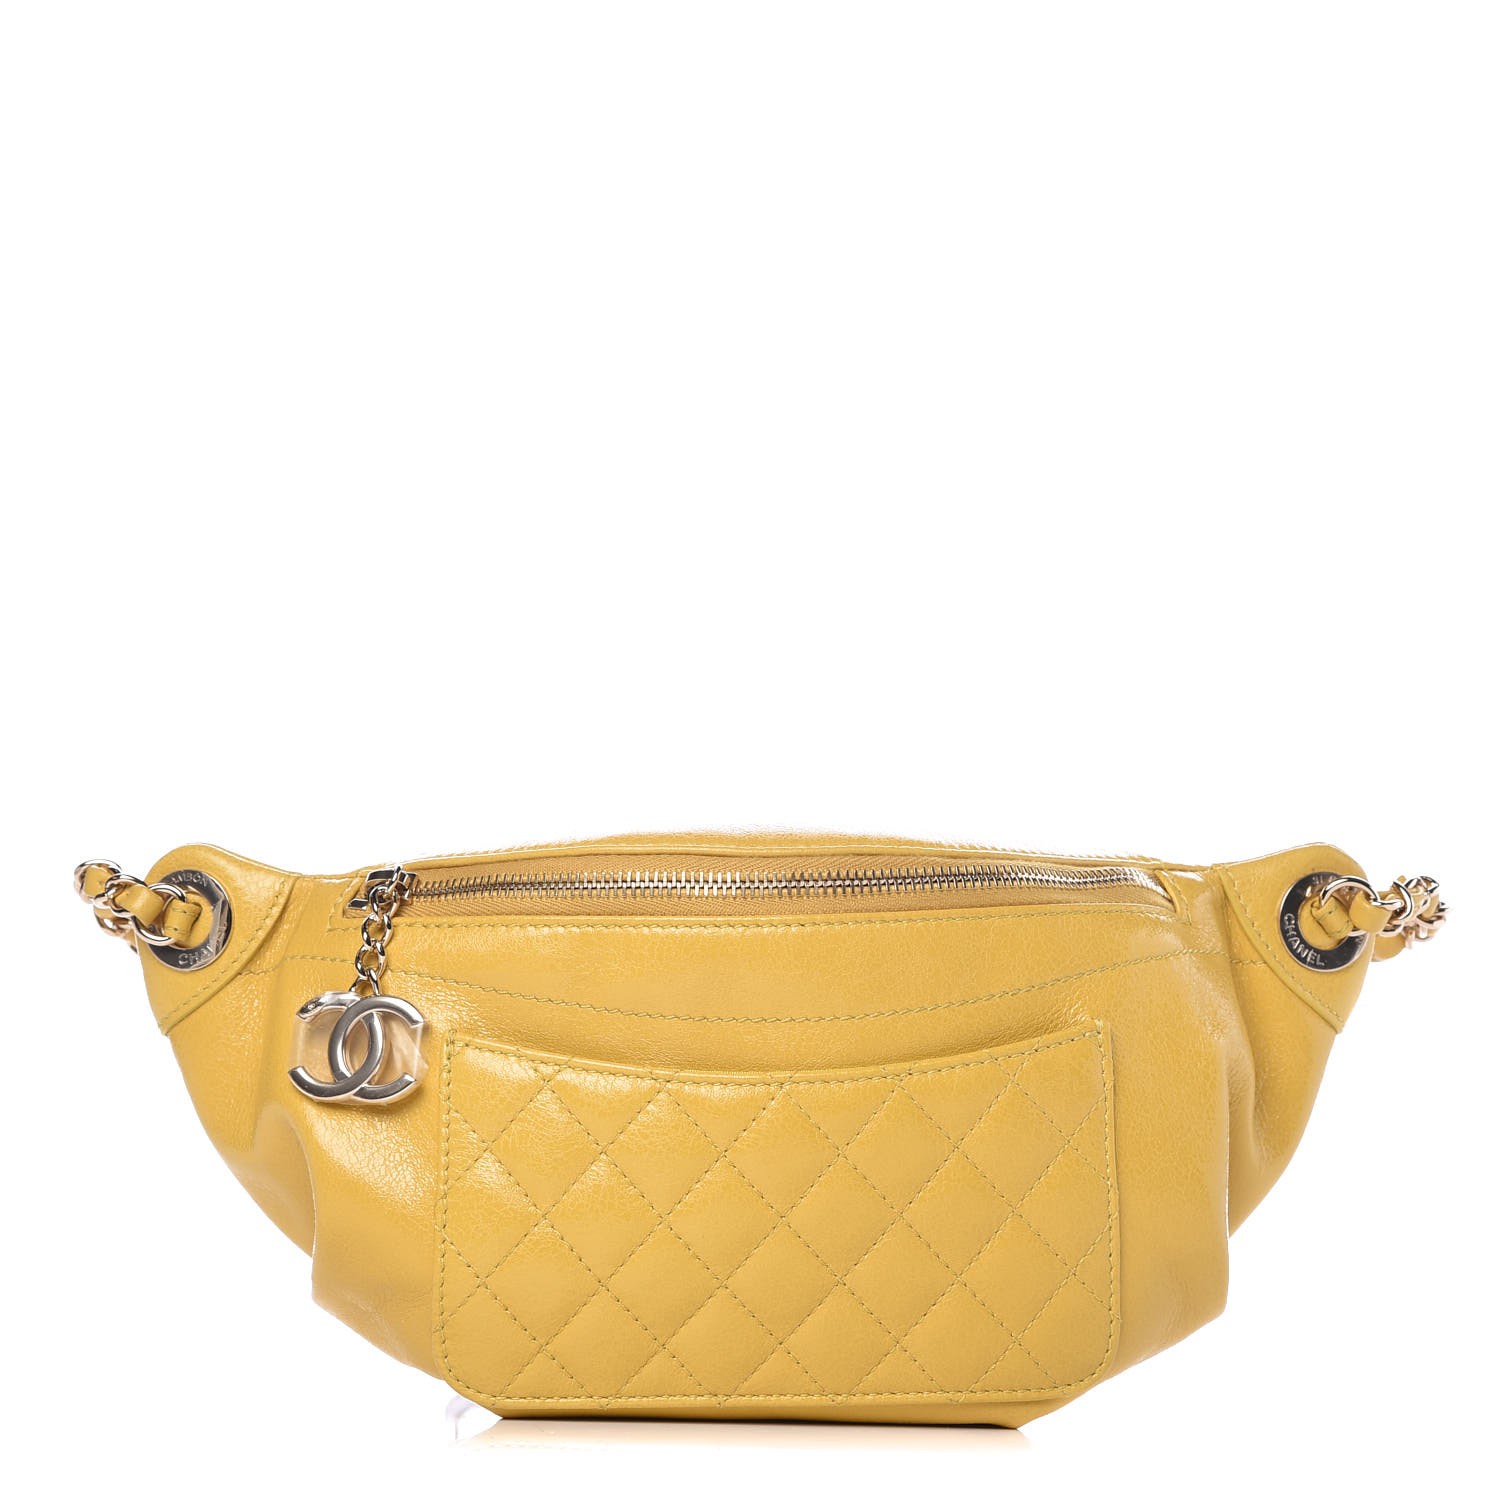 CHANEL Crumpled Glazed Lambskin Quilted Waist Bag Fanny Pack Yellow 327712